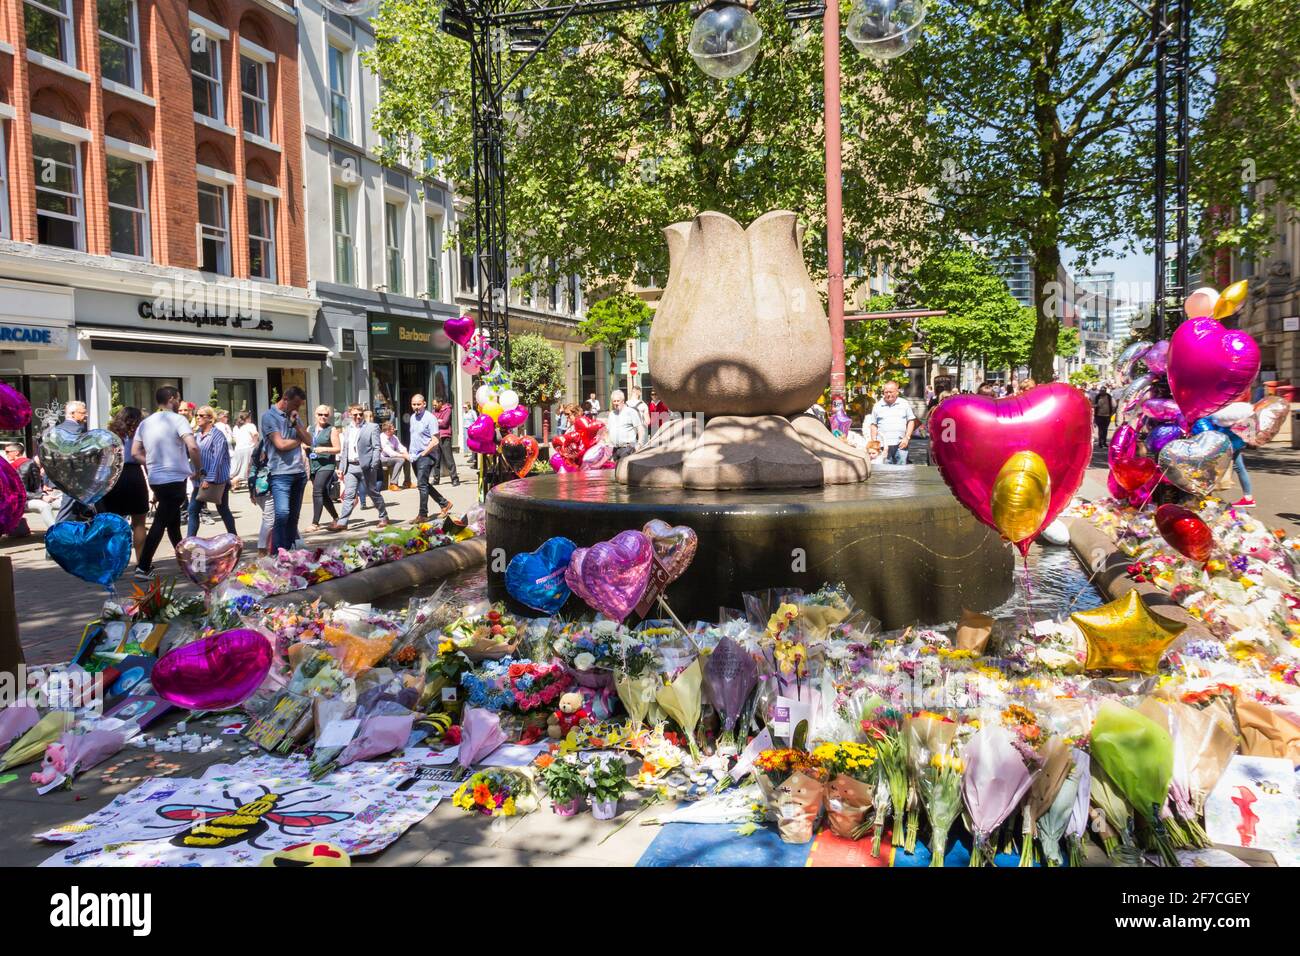 Manchester, UK. 23rd May 2018. A year and a day after the Manchester Arena terrorist bombing, in which 22 people died and over 800 were injured. Stock Photo